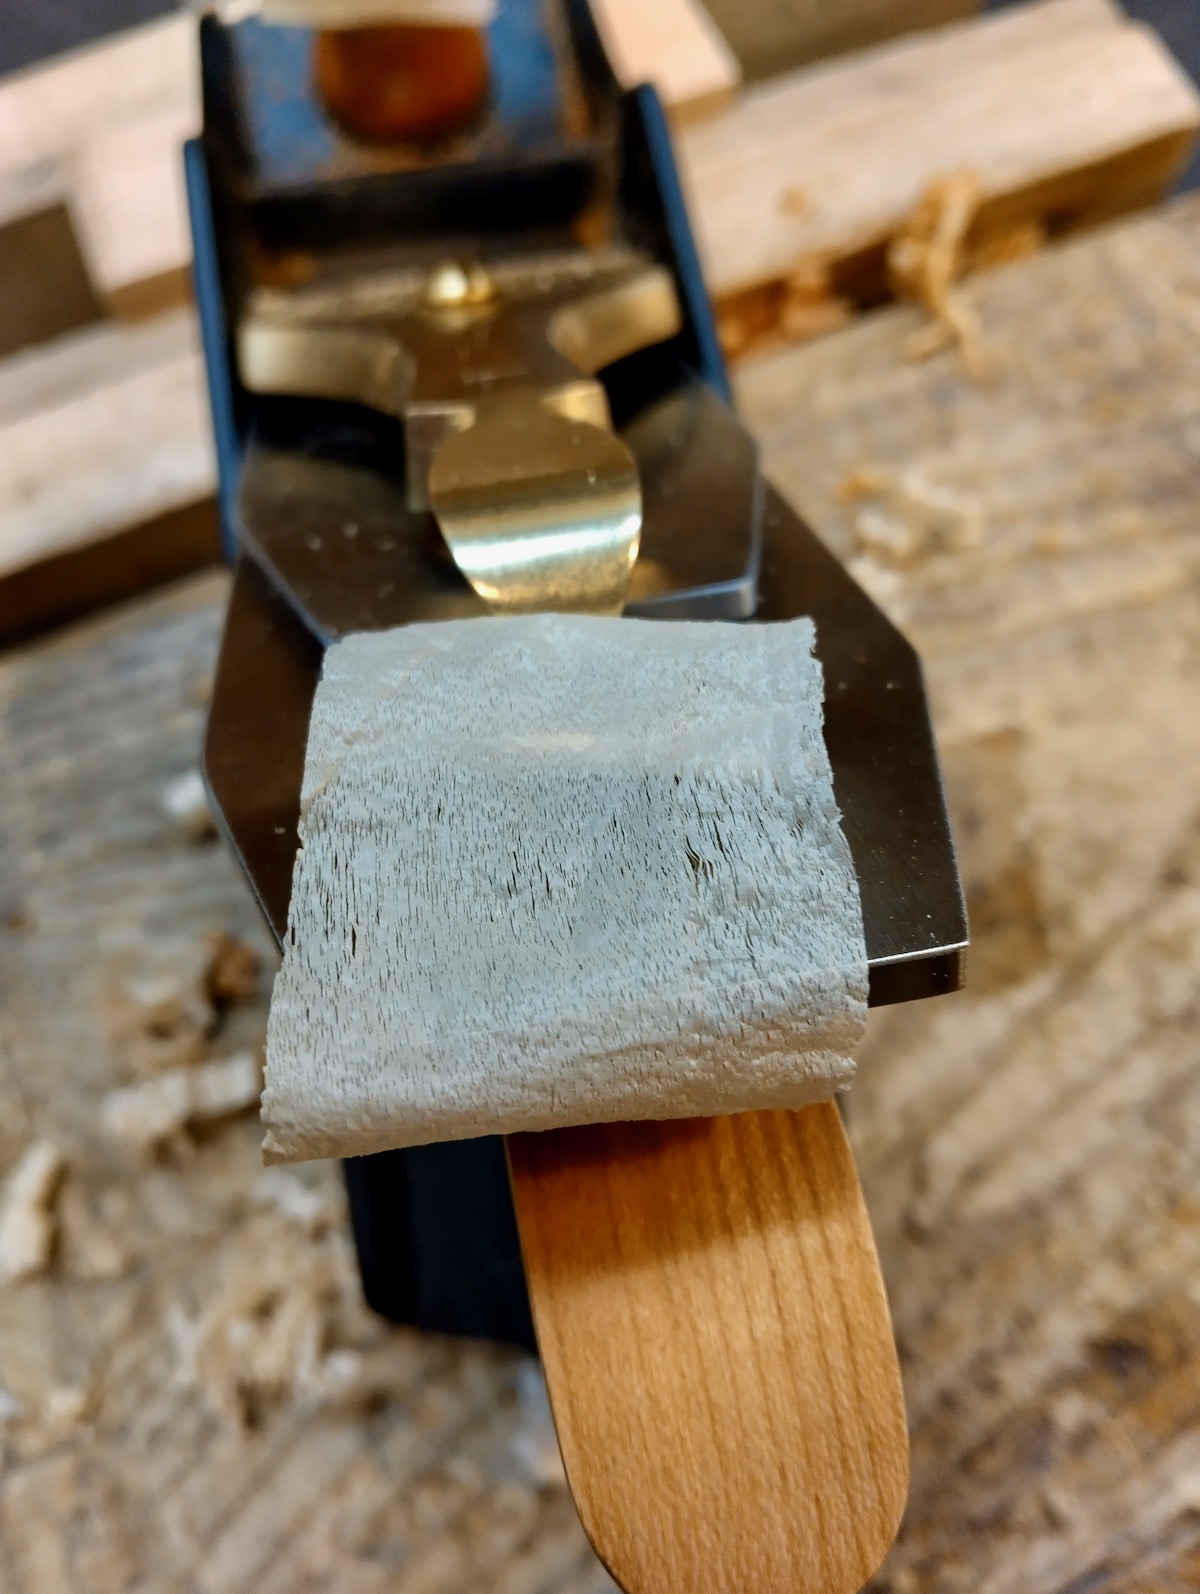 Quality tools inspire excellence - FineWoodworking